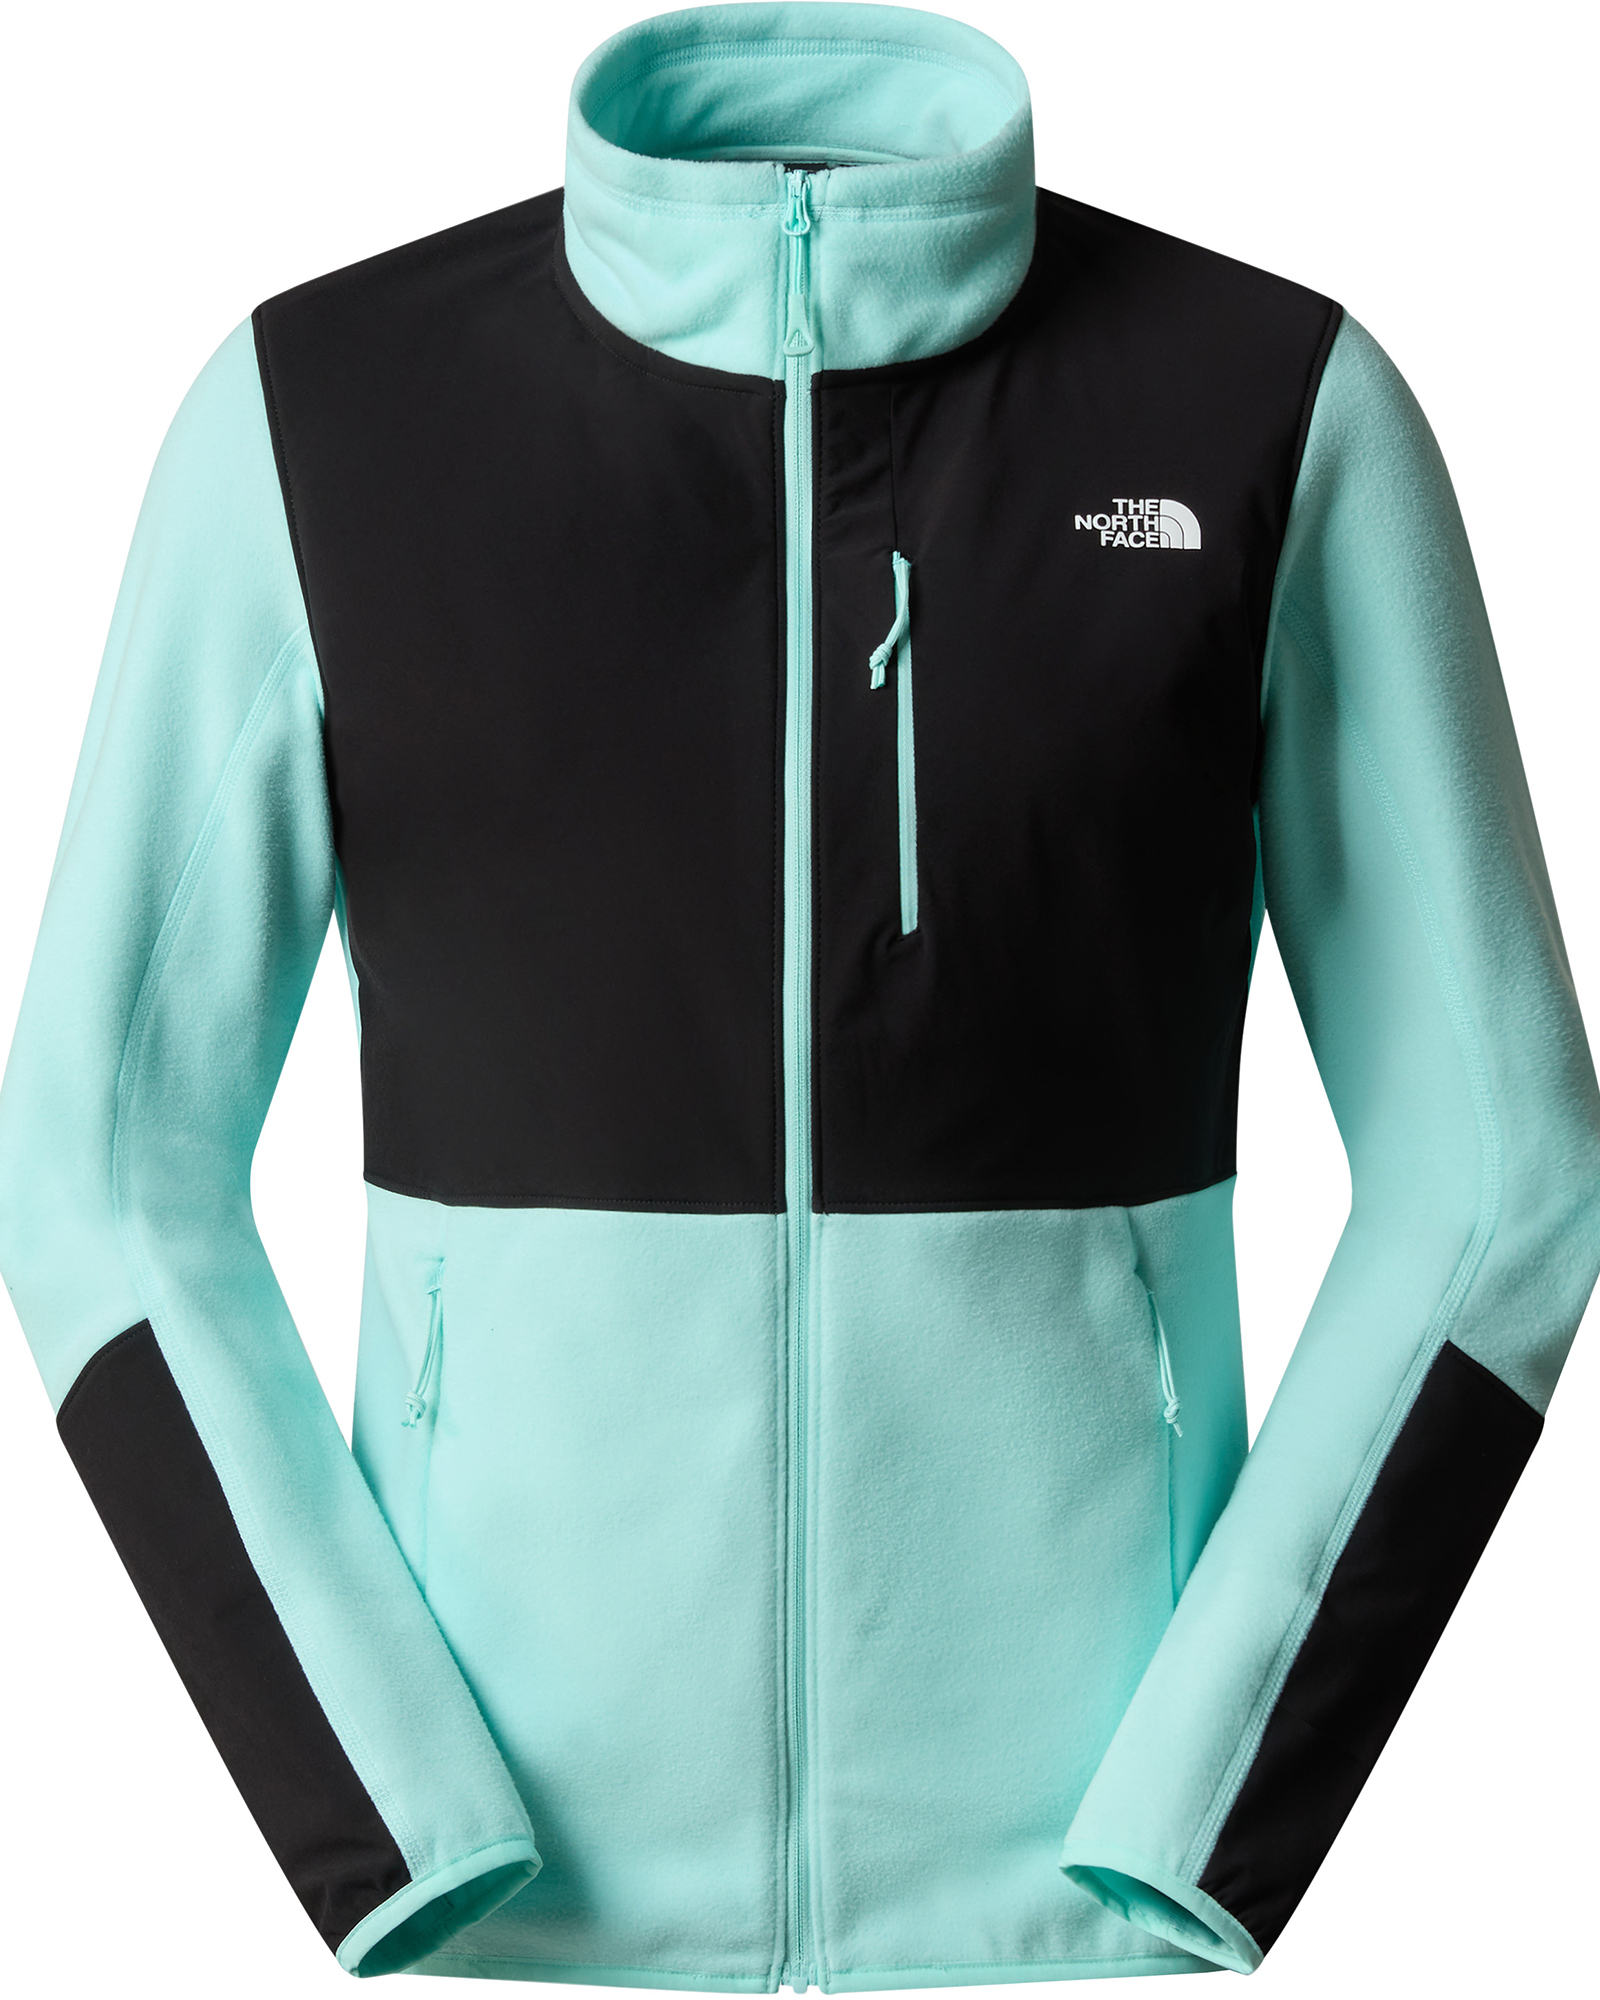 The North Face Diablo Women’s Mid Layer Jacket - Powder Teal-TNF Black S